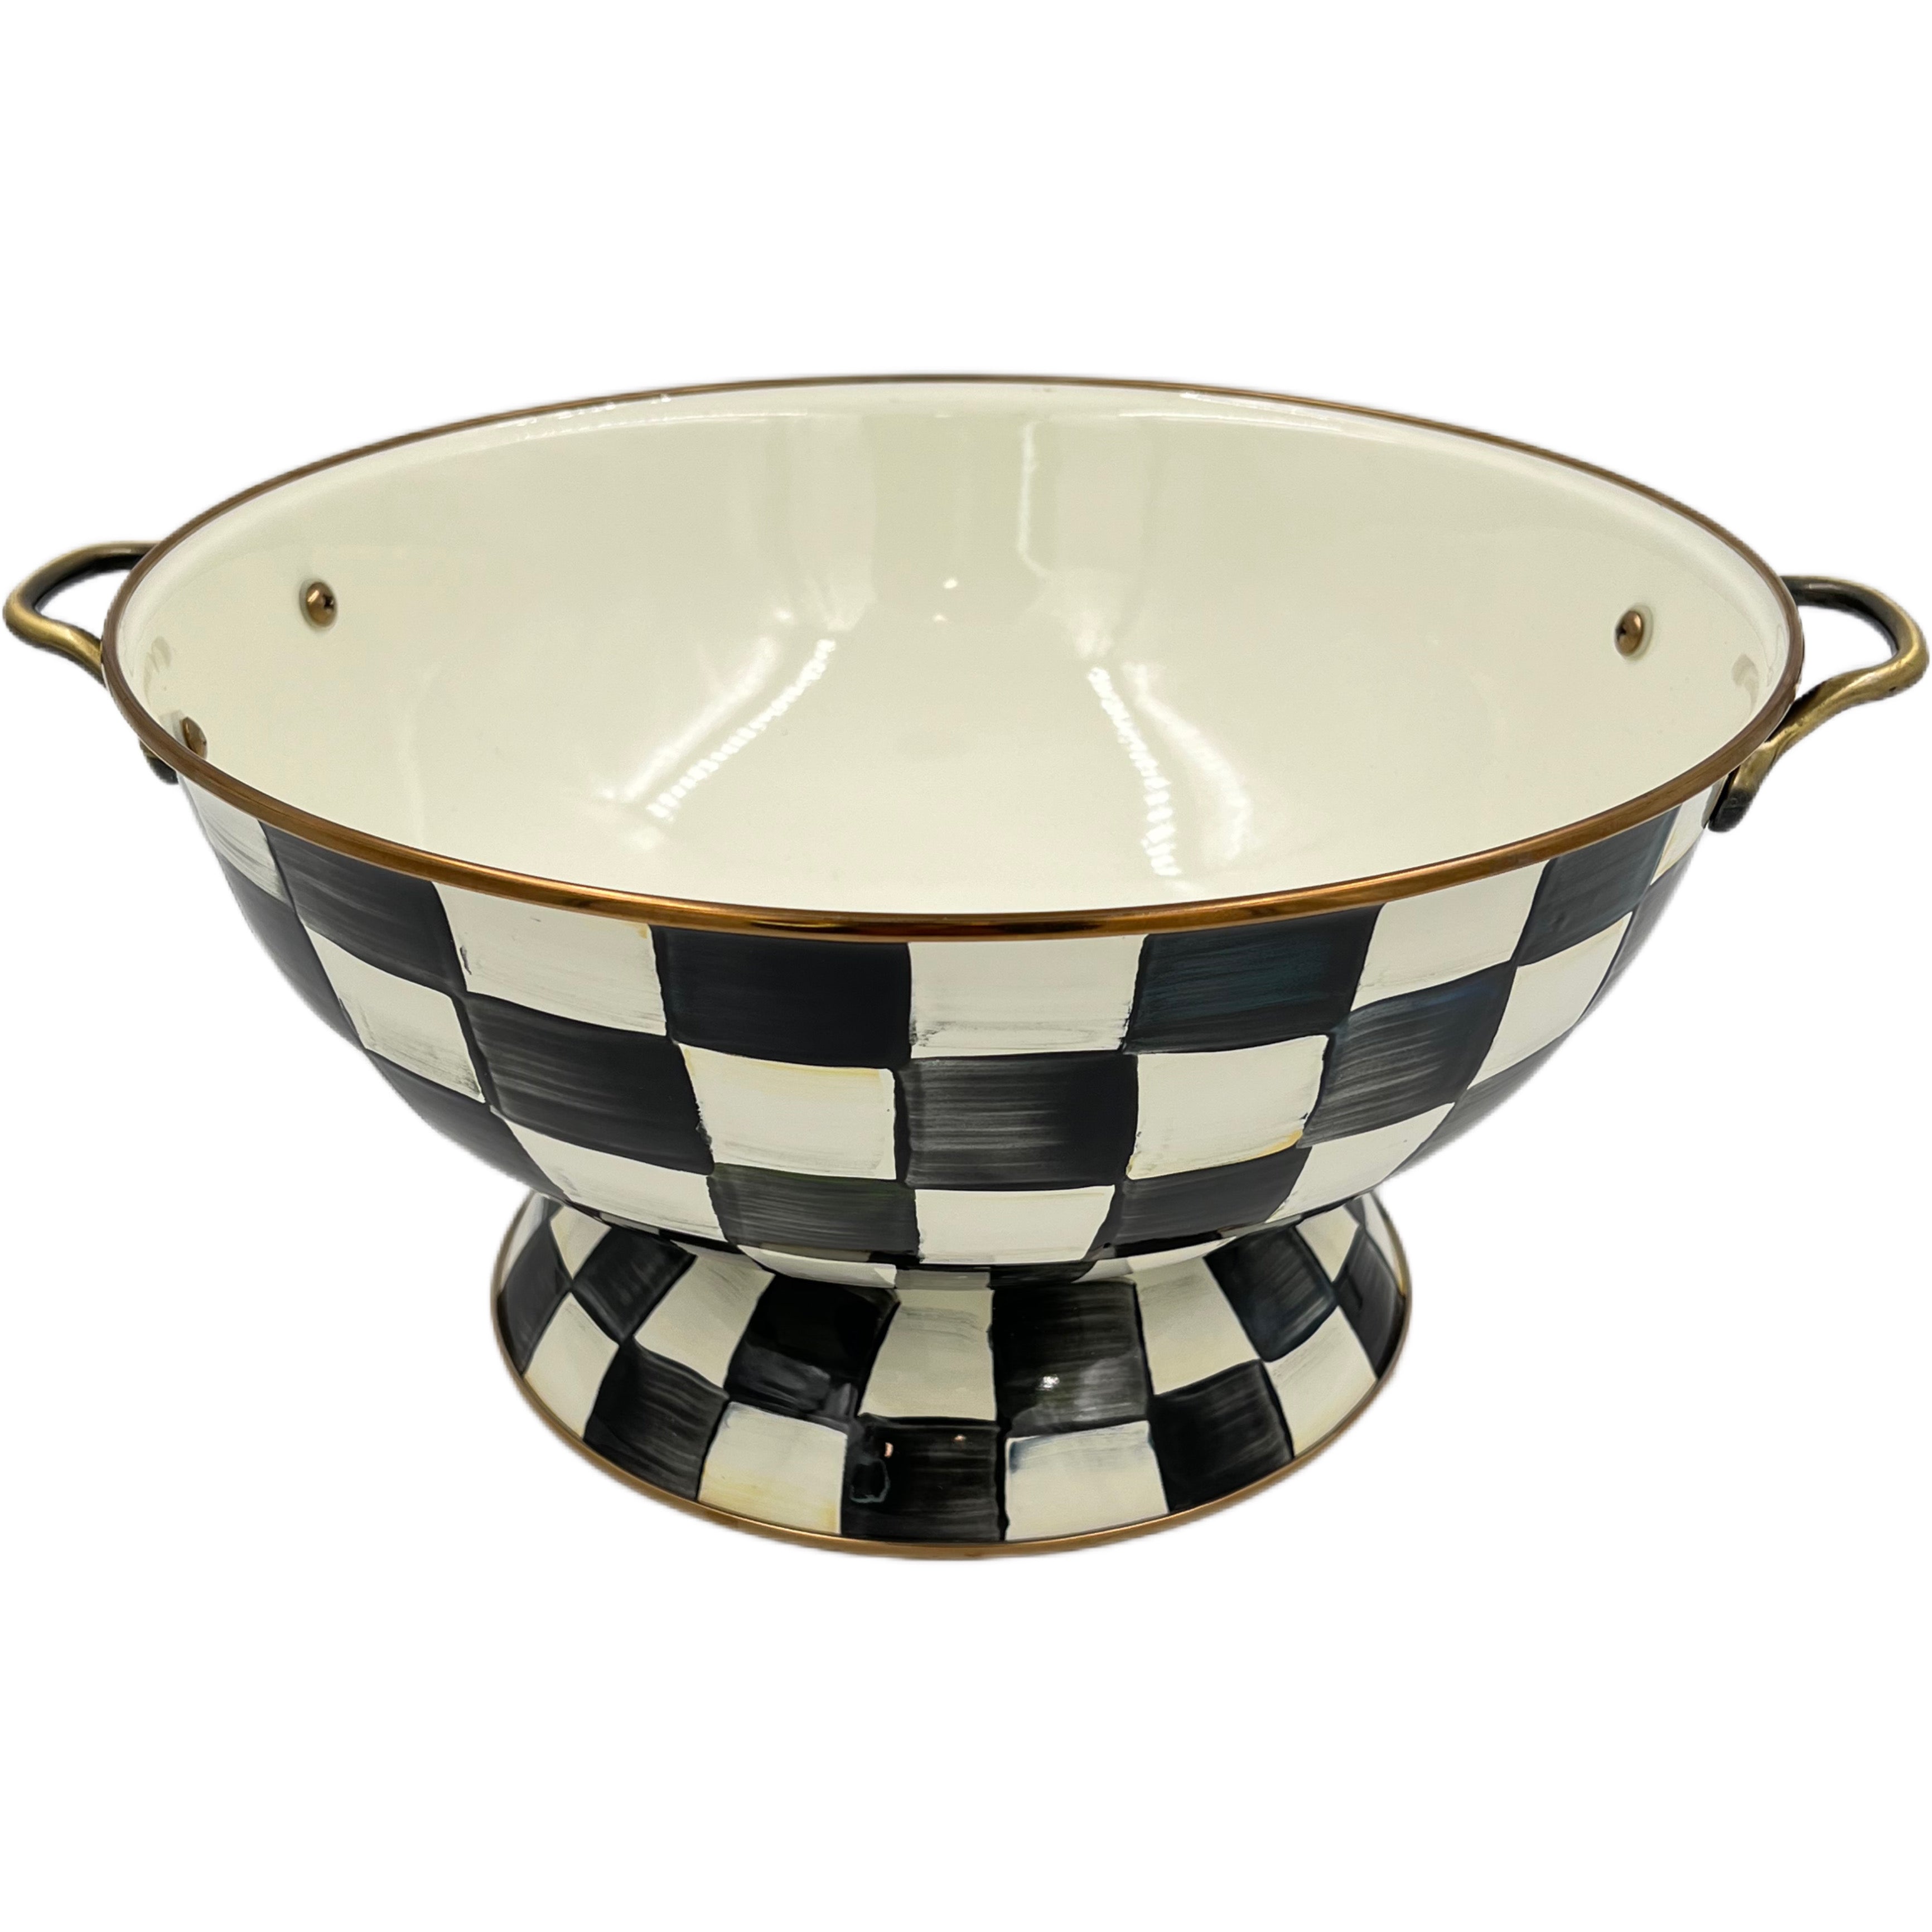 MacKenzie-Childs Courtly Check Enamel Almost Everything Bowl